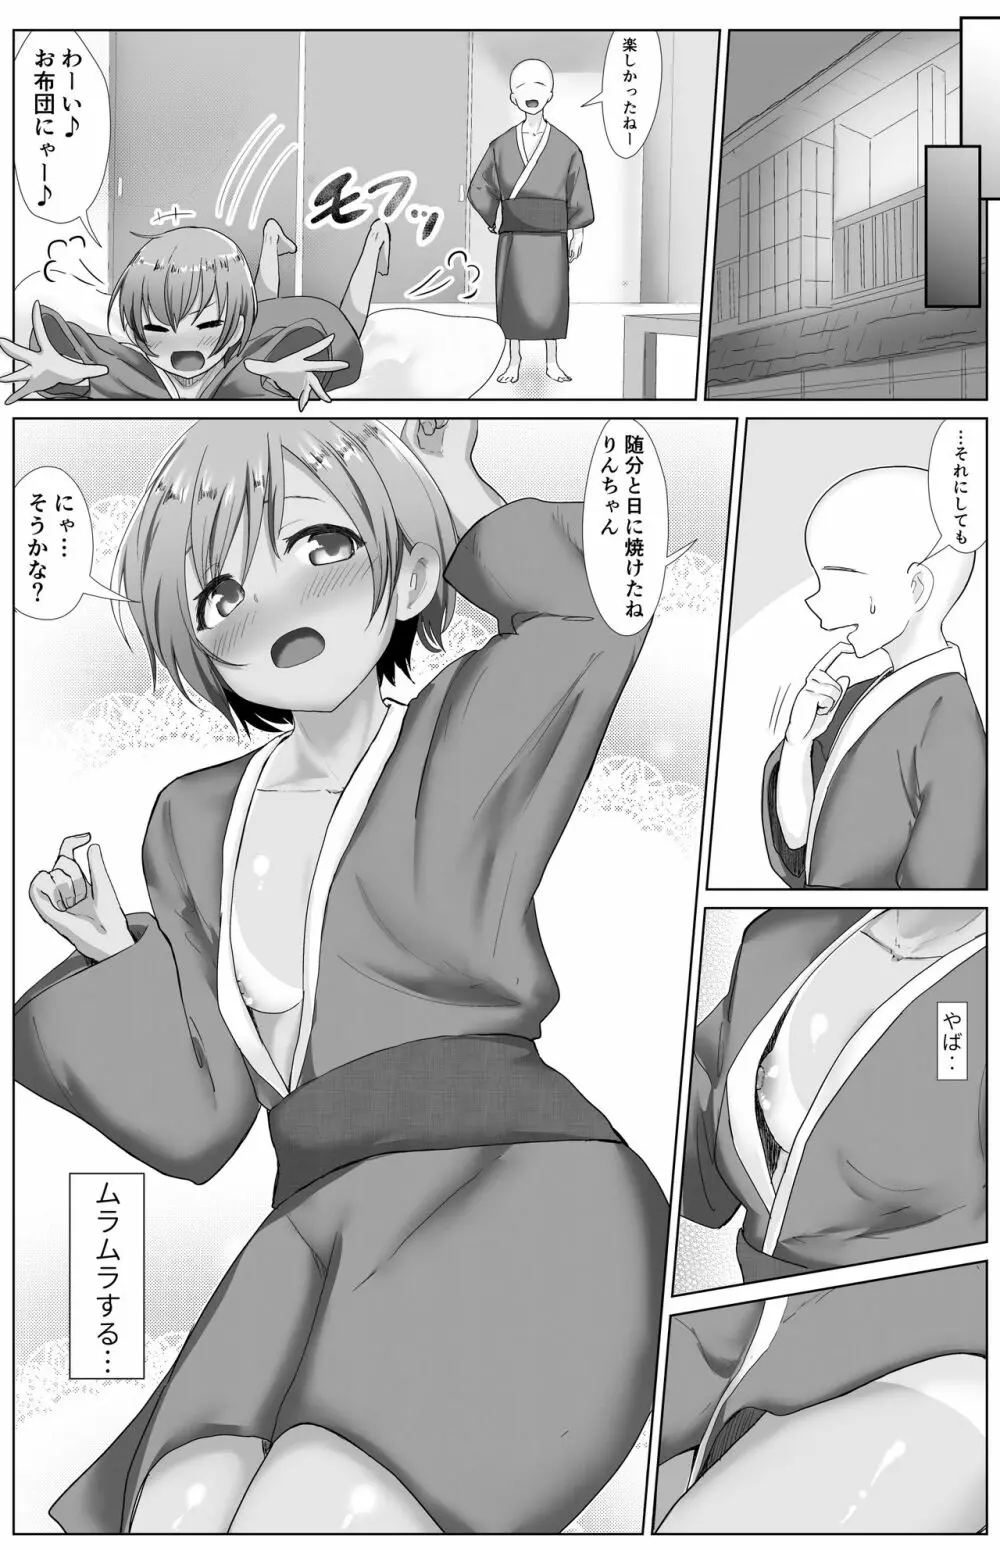 e-rn fanbox short love live doujinshi collection - page58